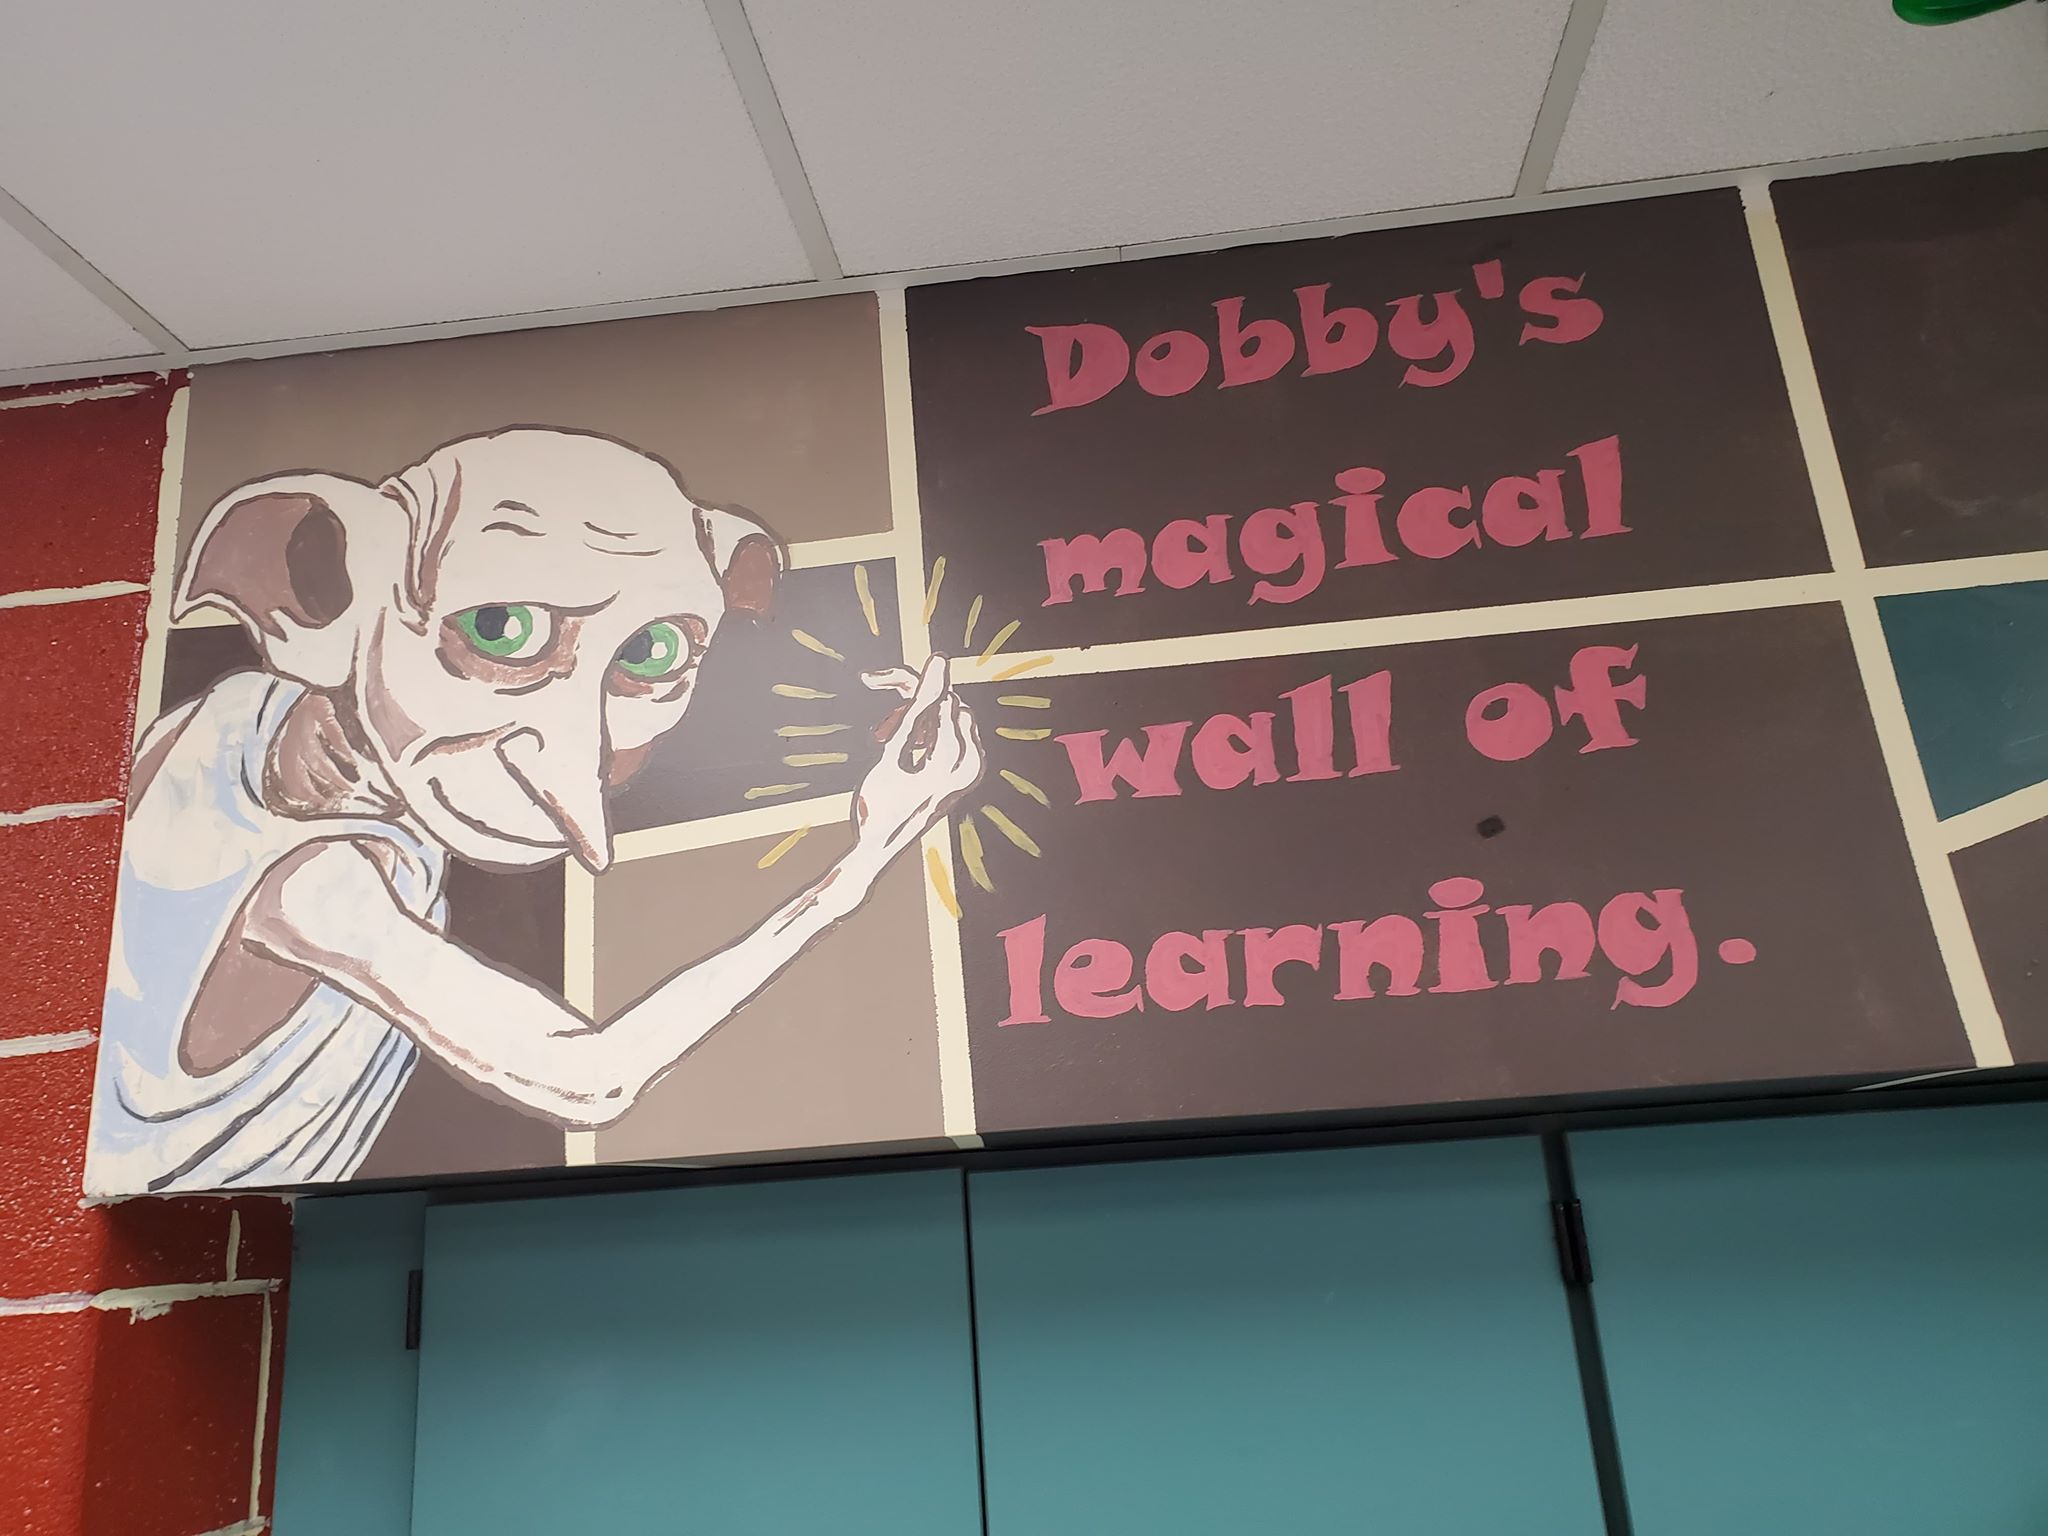 Dobby's magical wall of learning with Dobby the house elf.